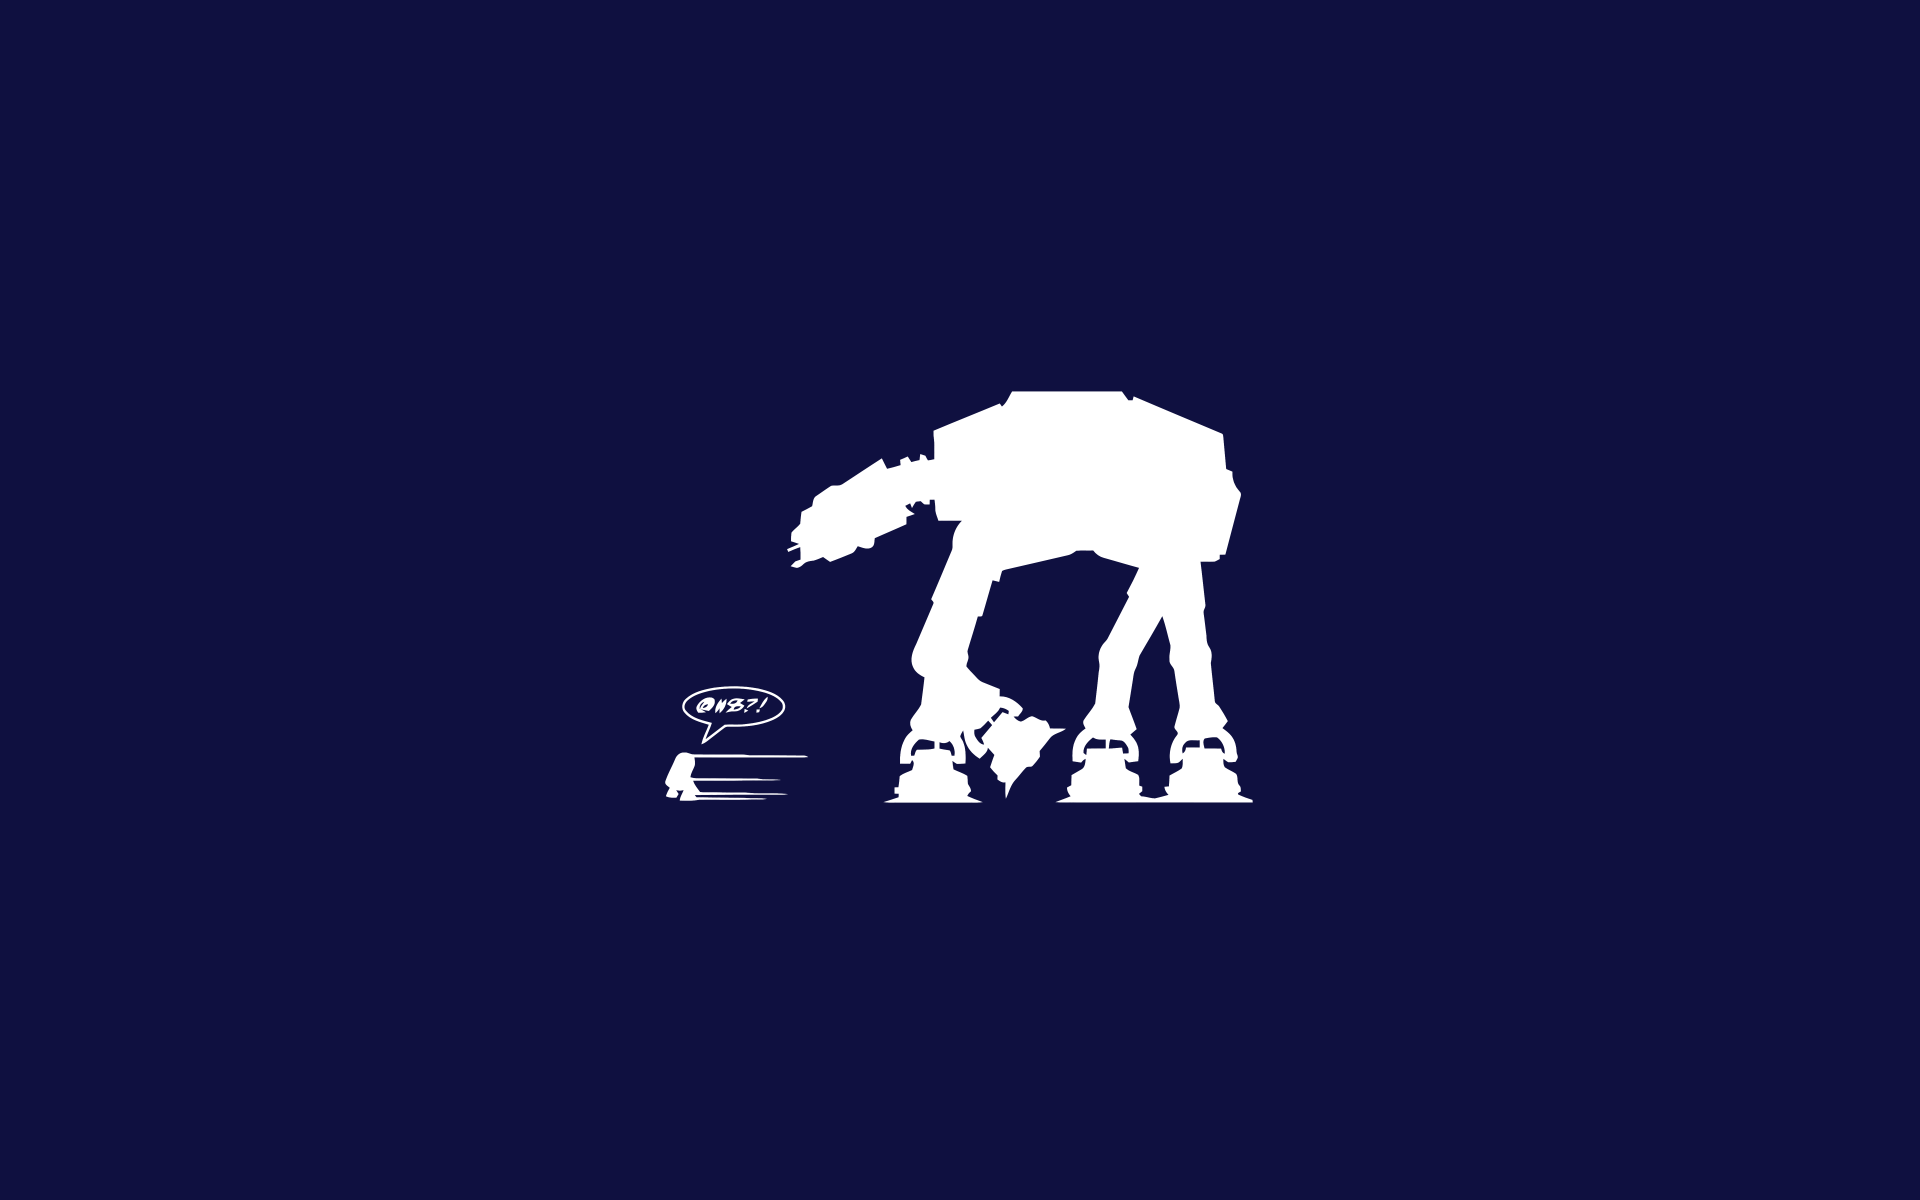 55 Star Wars R2 D2 Cool Space Backgrounds On Wallpapersafari